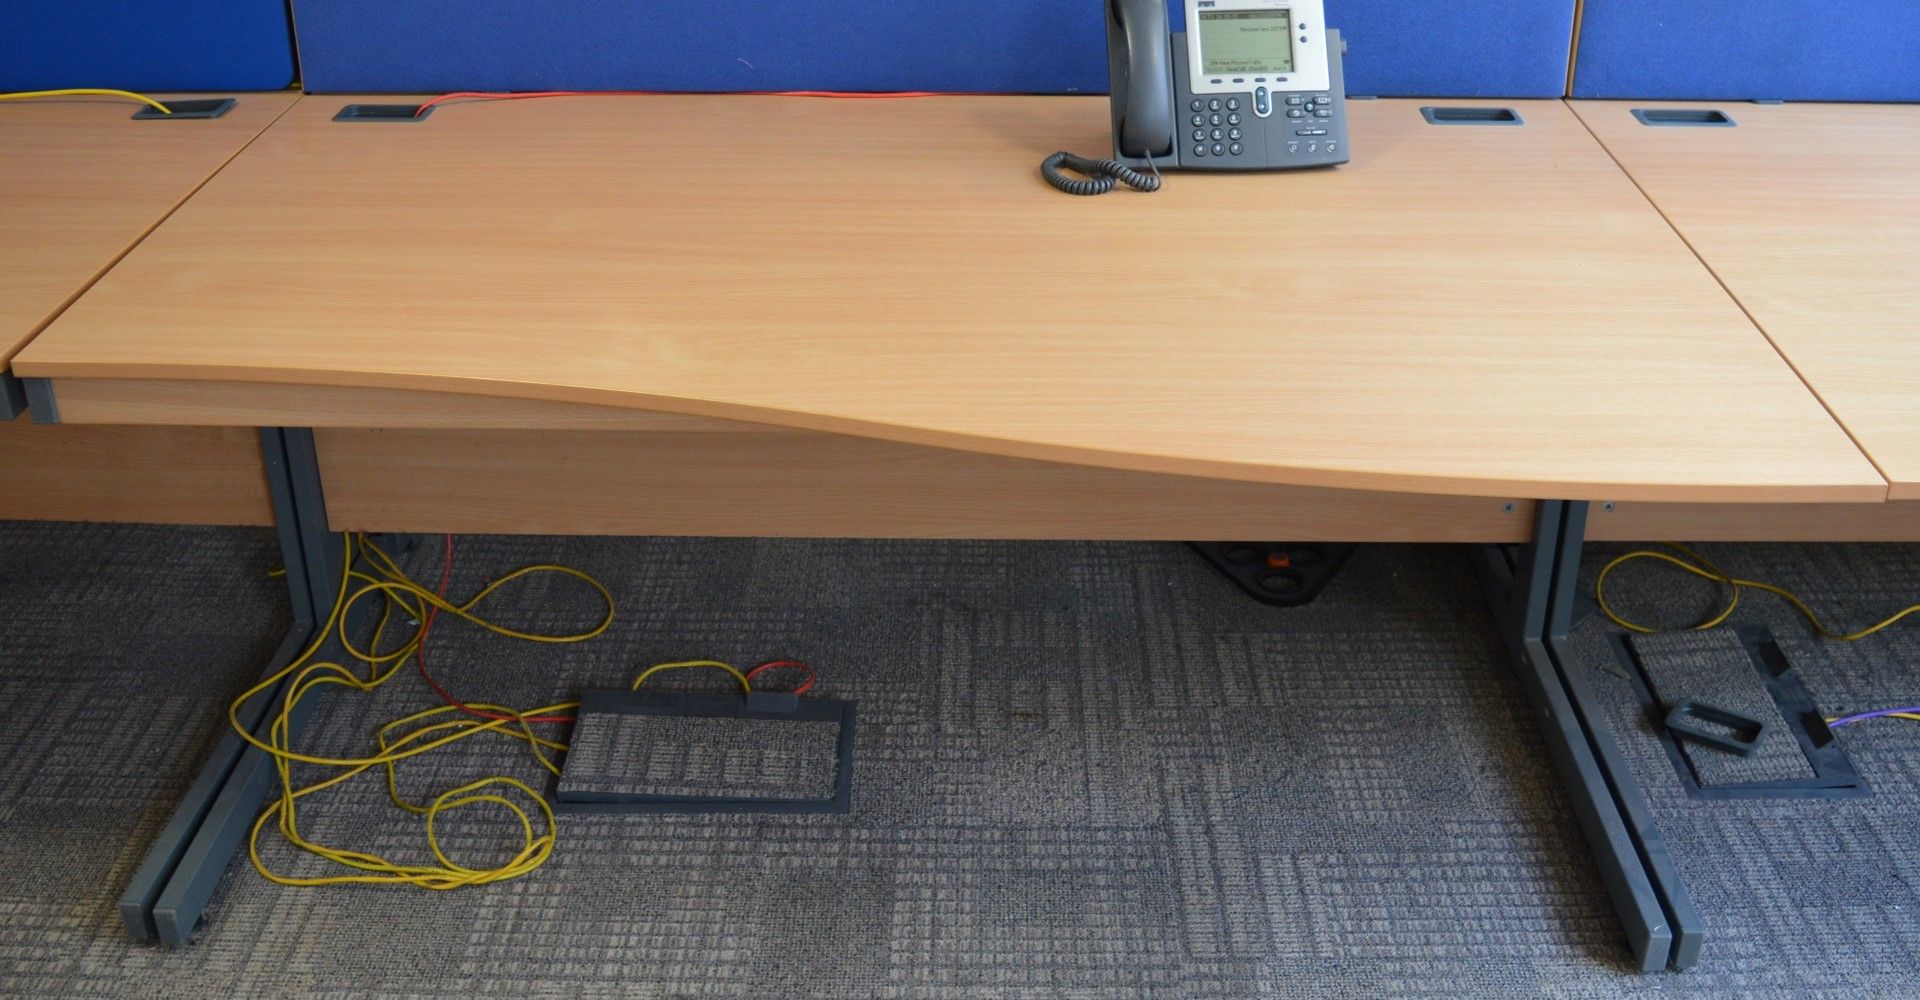 1 x Imperial Office Desk - Right Hand - Quality Beech Desk With Grey Coated Steel Frame - H71 x W160 - Image 3 of 5